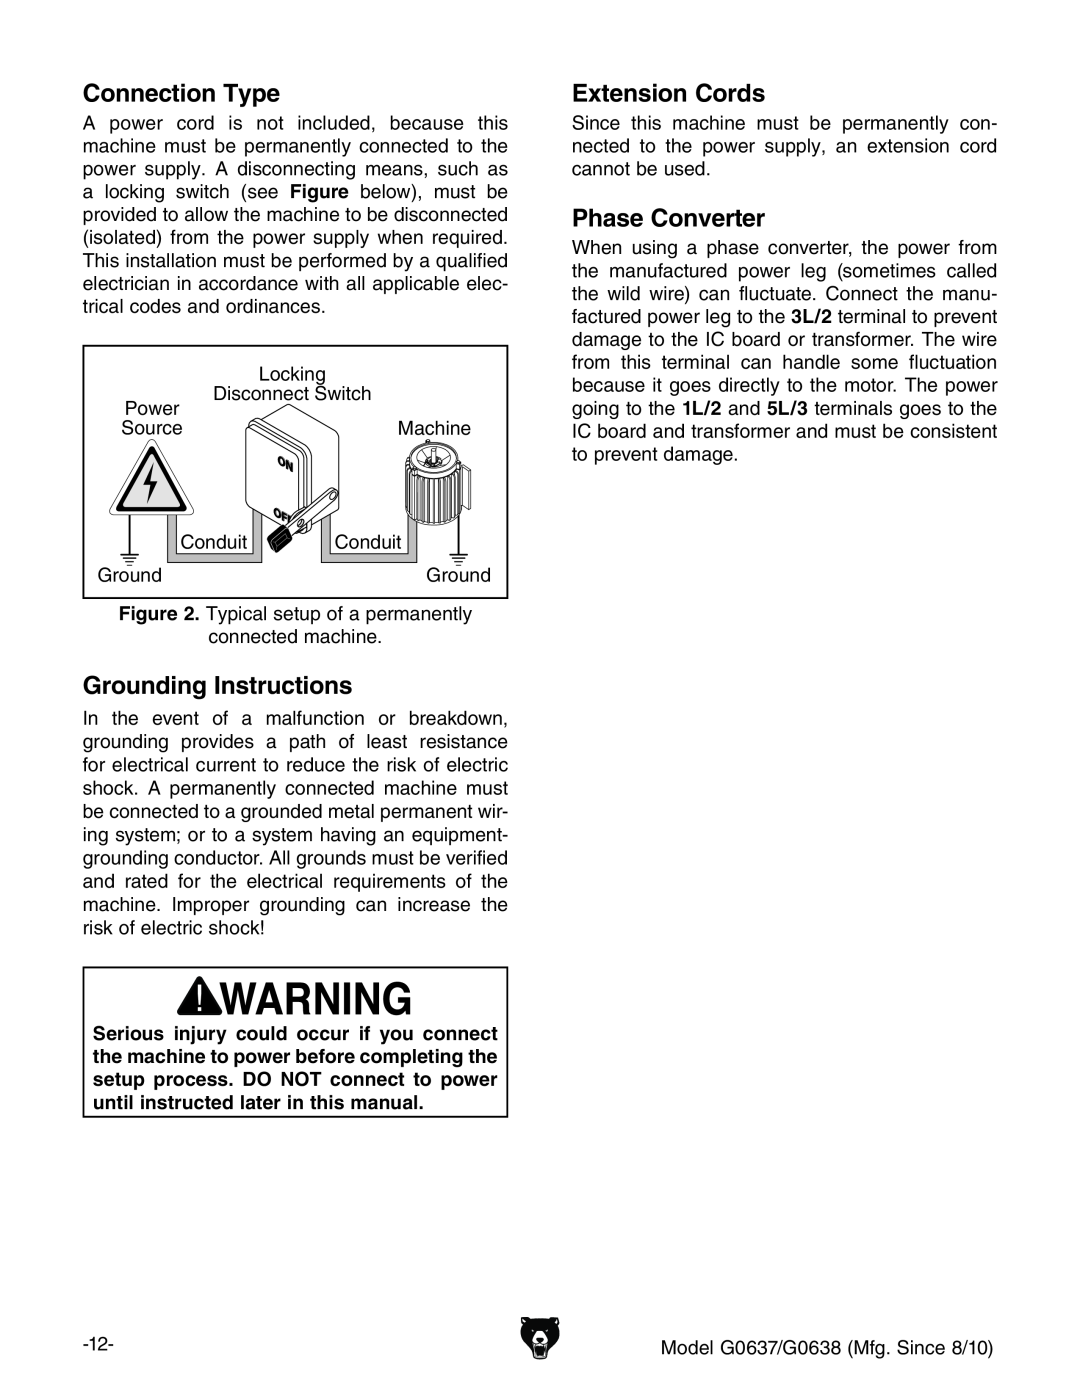 Grizzly G0637 owner manual Connection Type, Grounding Instructions, Extension Cords, Phase Converter 